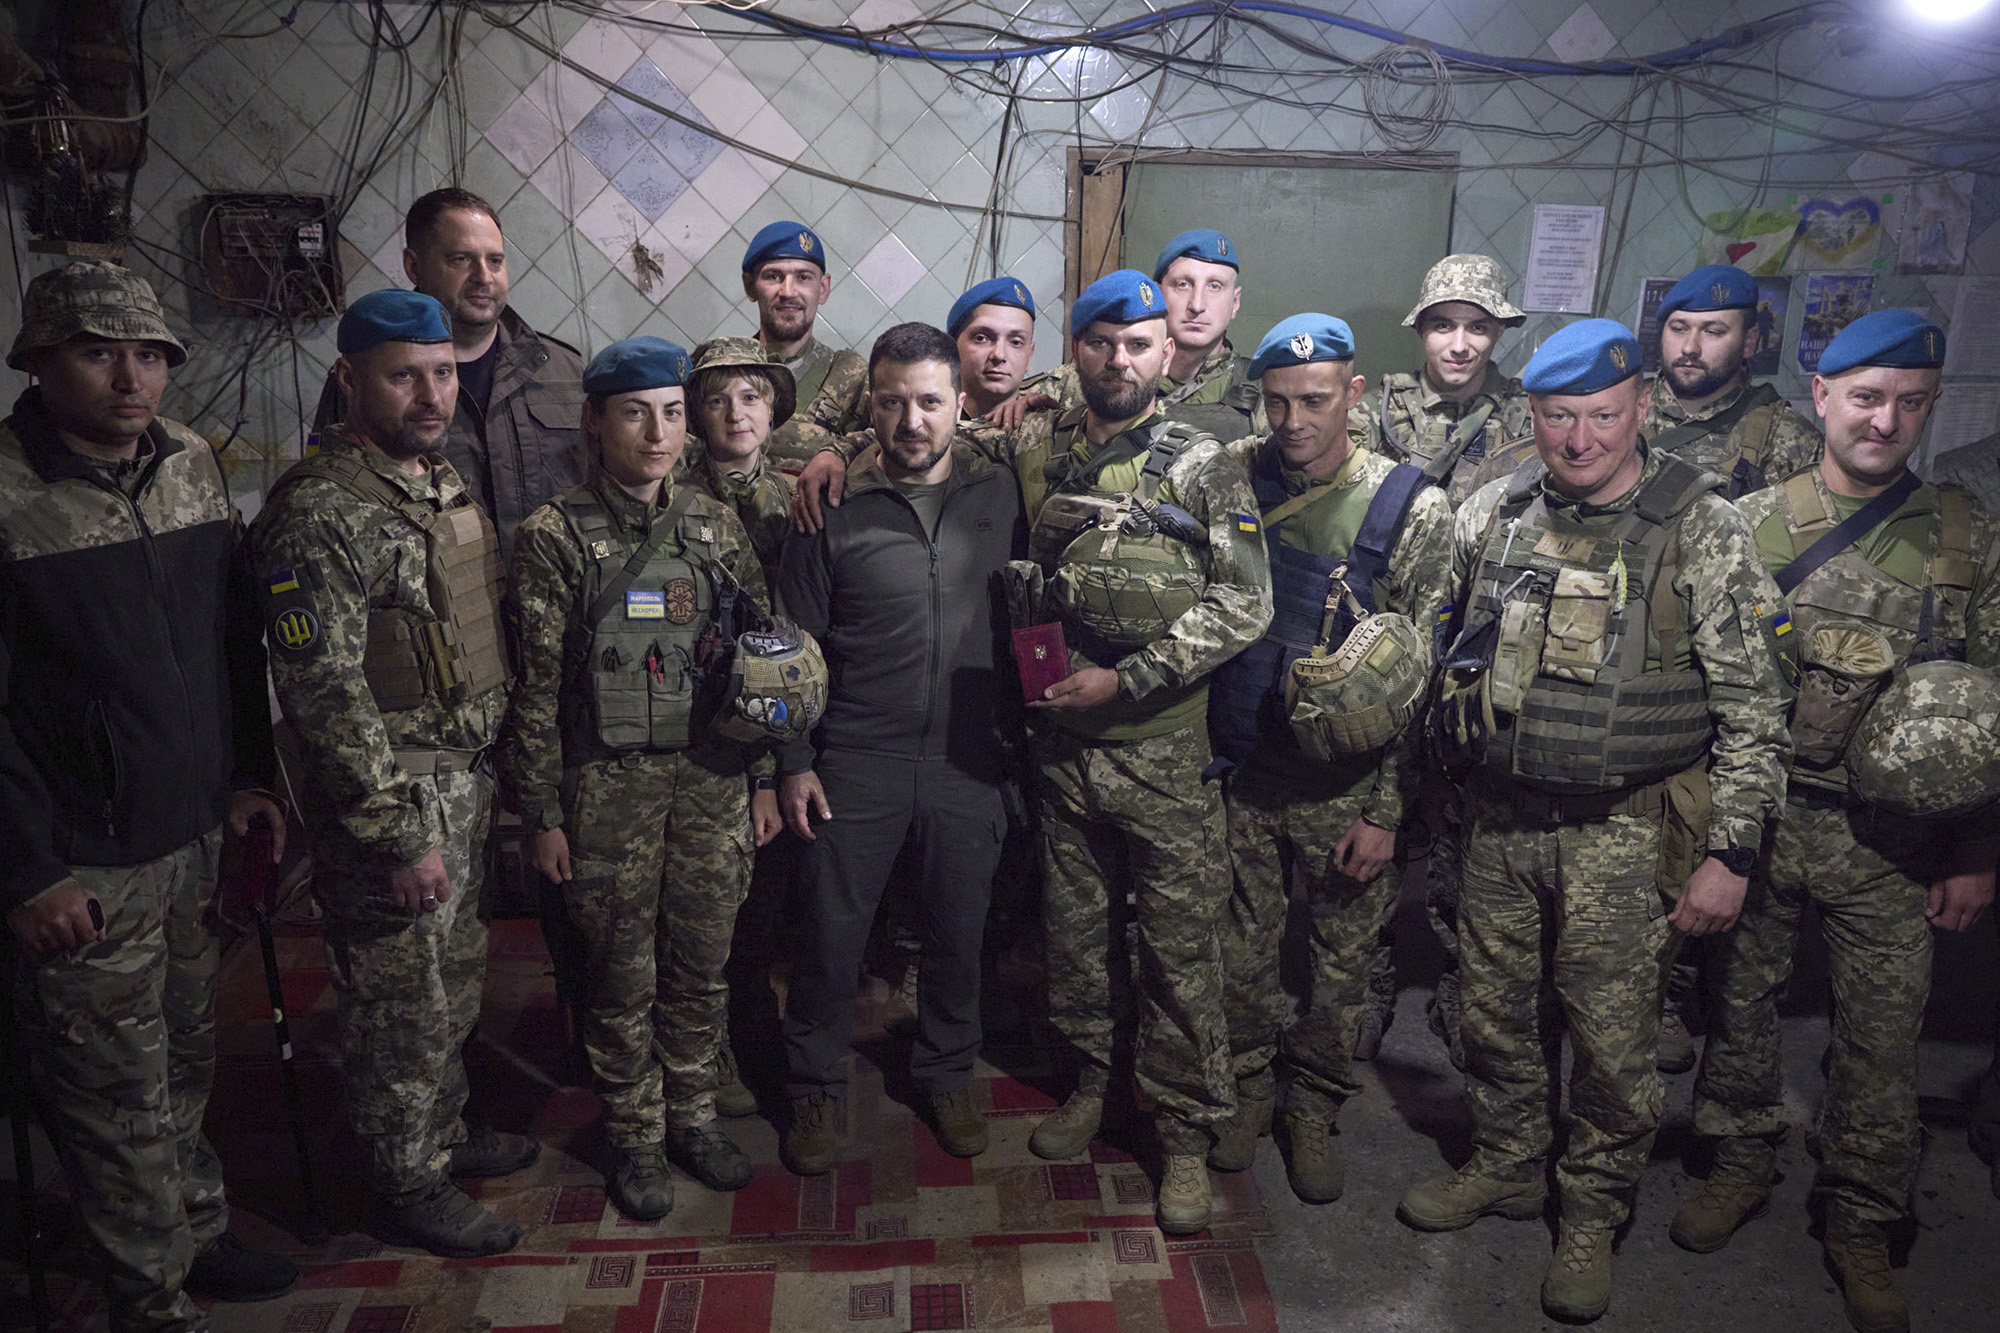 In this photo provided by the Ukrainian Presidential Press Office, Ukrainian president Volodymyr Zelensky, center, poses for photo with soldiers after an awarding ceremony as he visits the Donetsk region, Ukraine, on May 23.